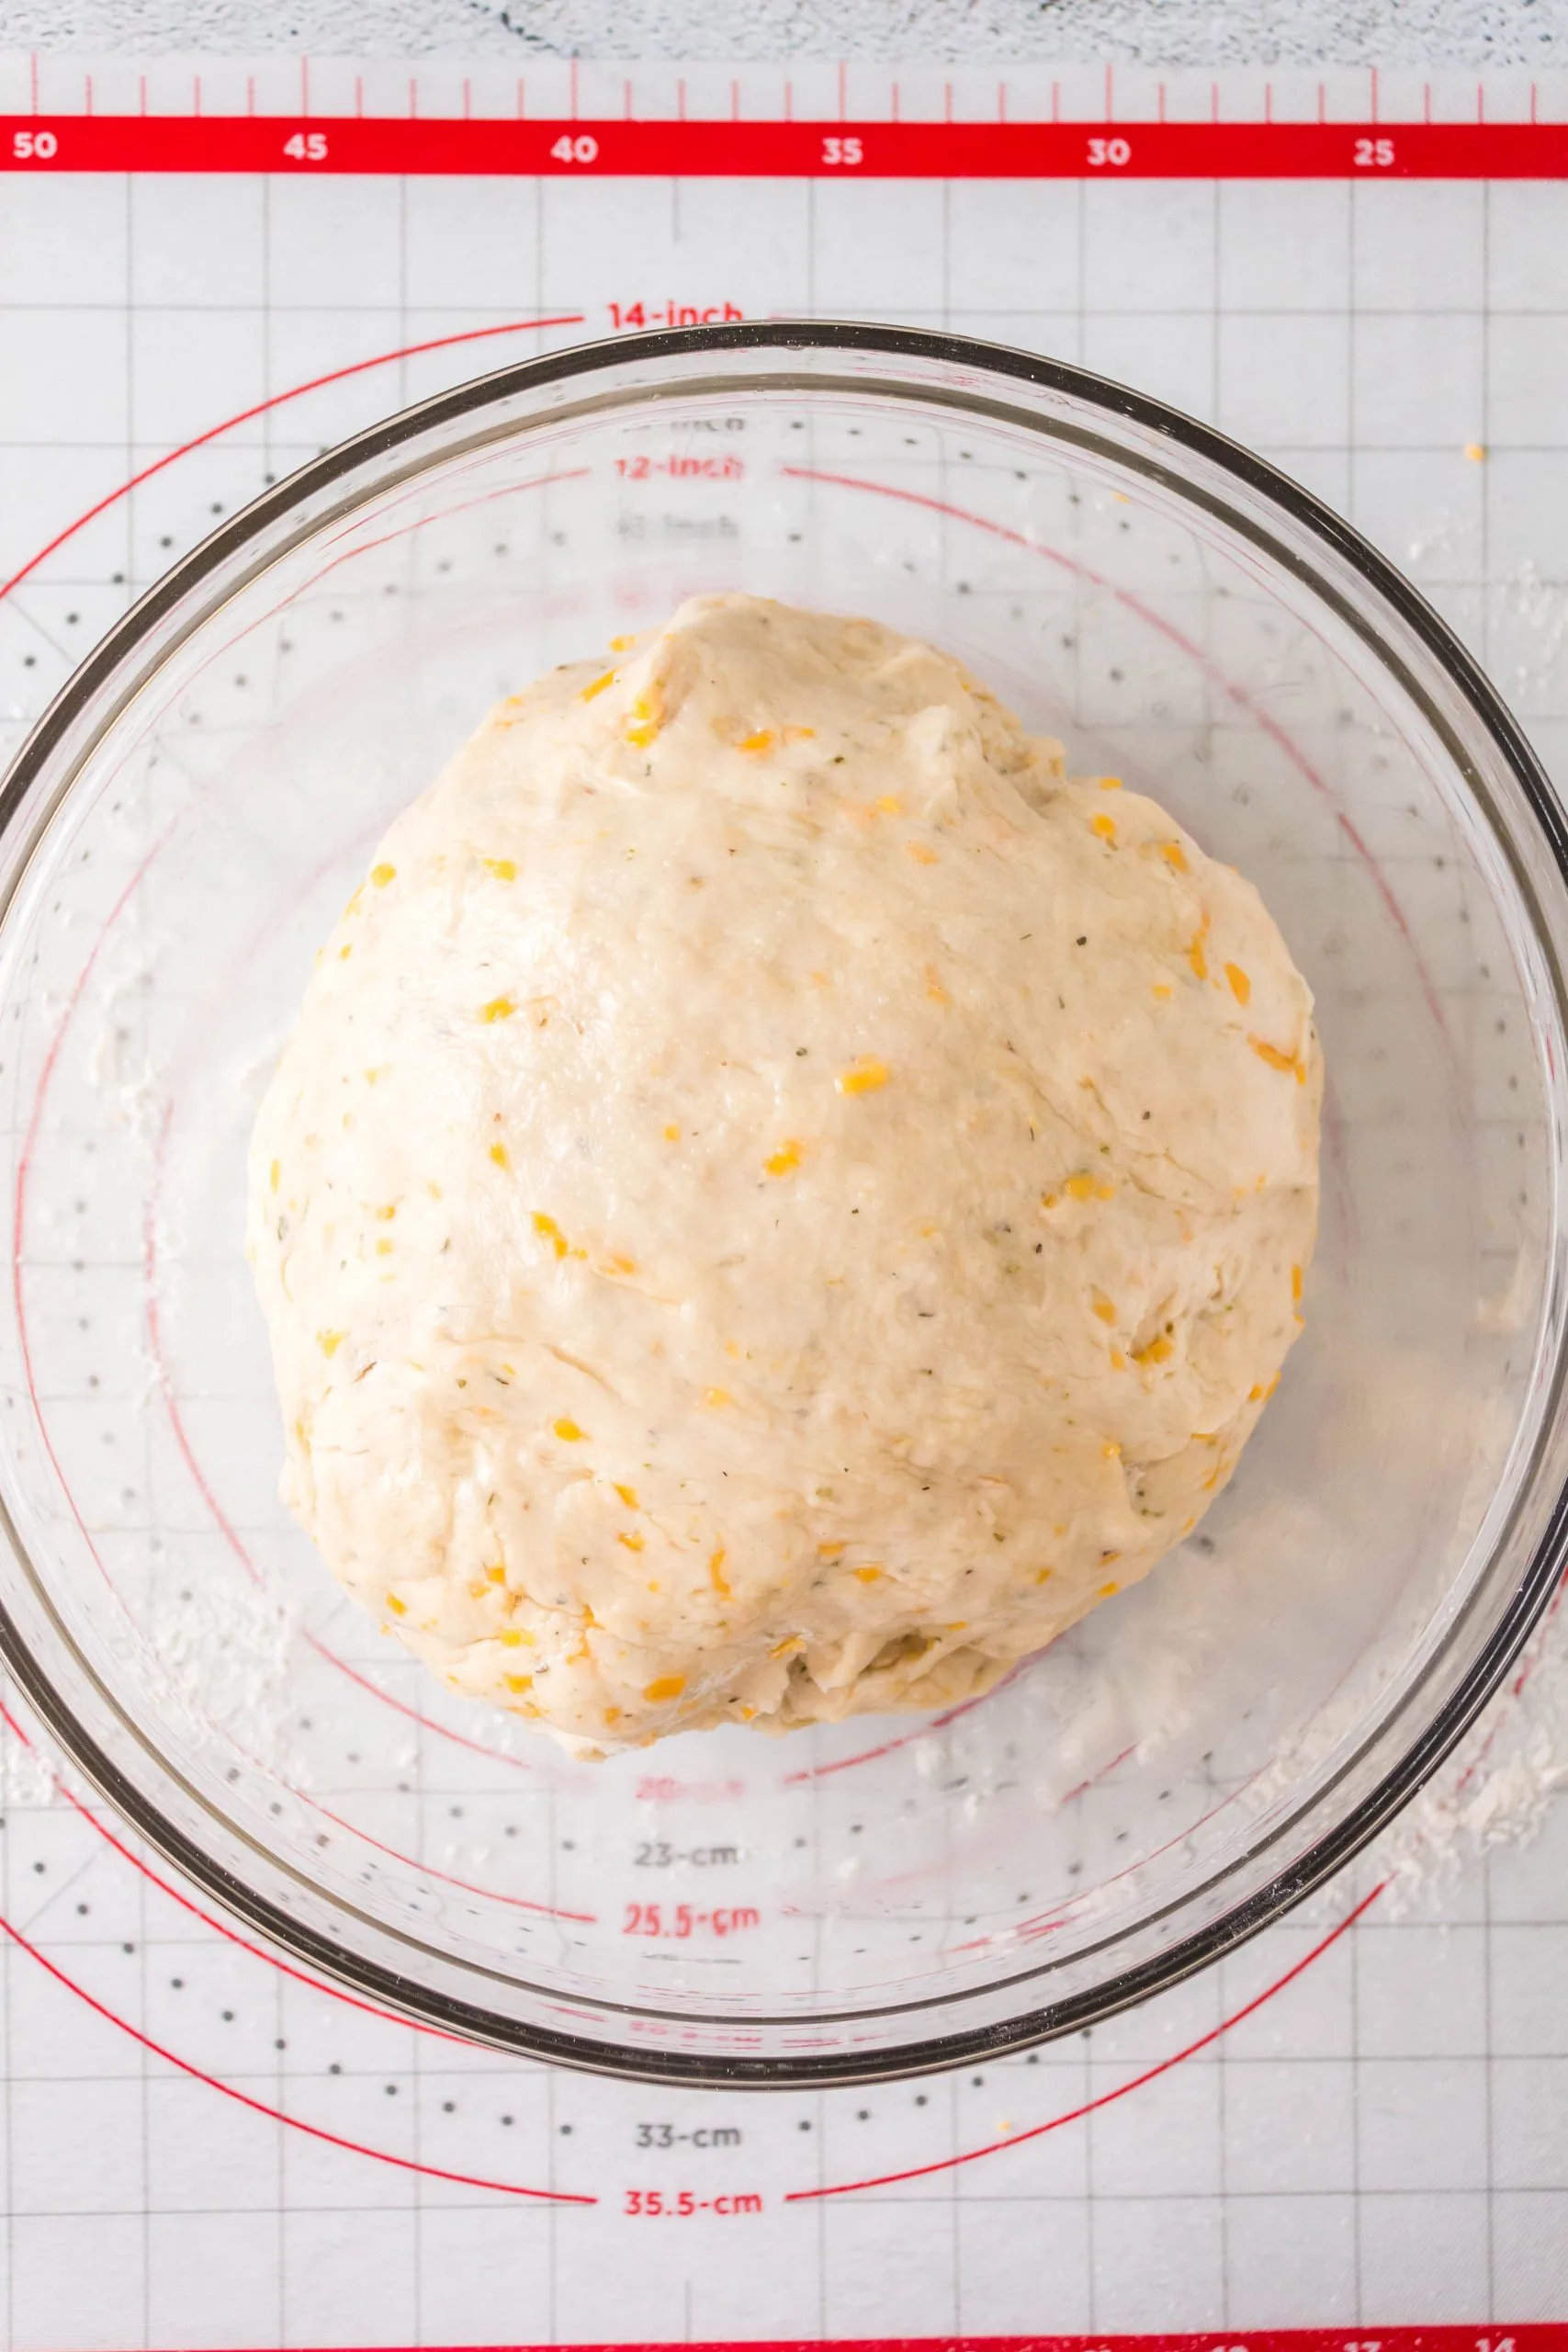 Dough dotted with cheese in a bowl to rise.